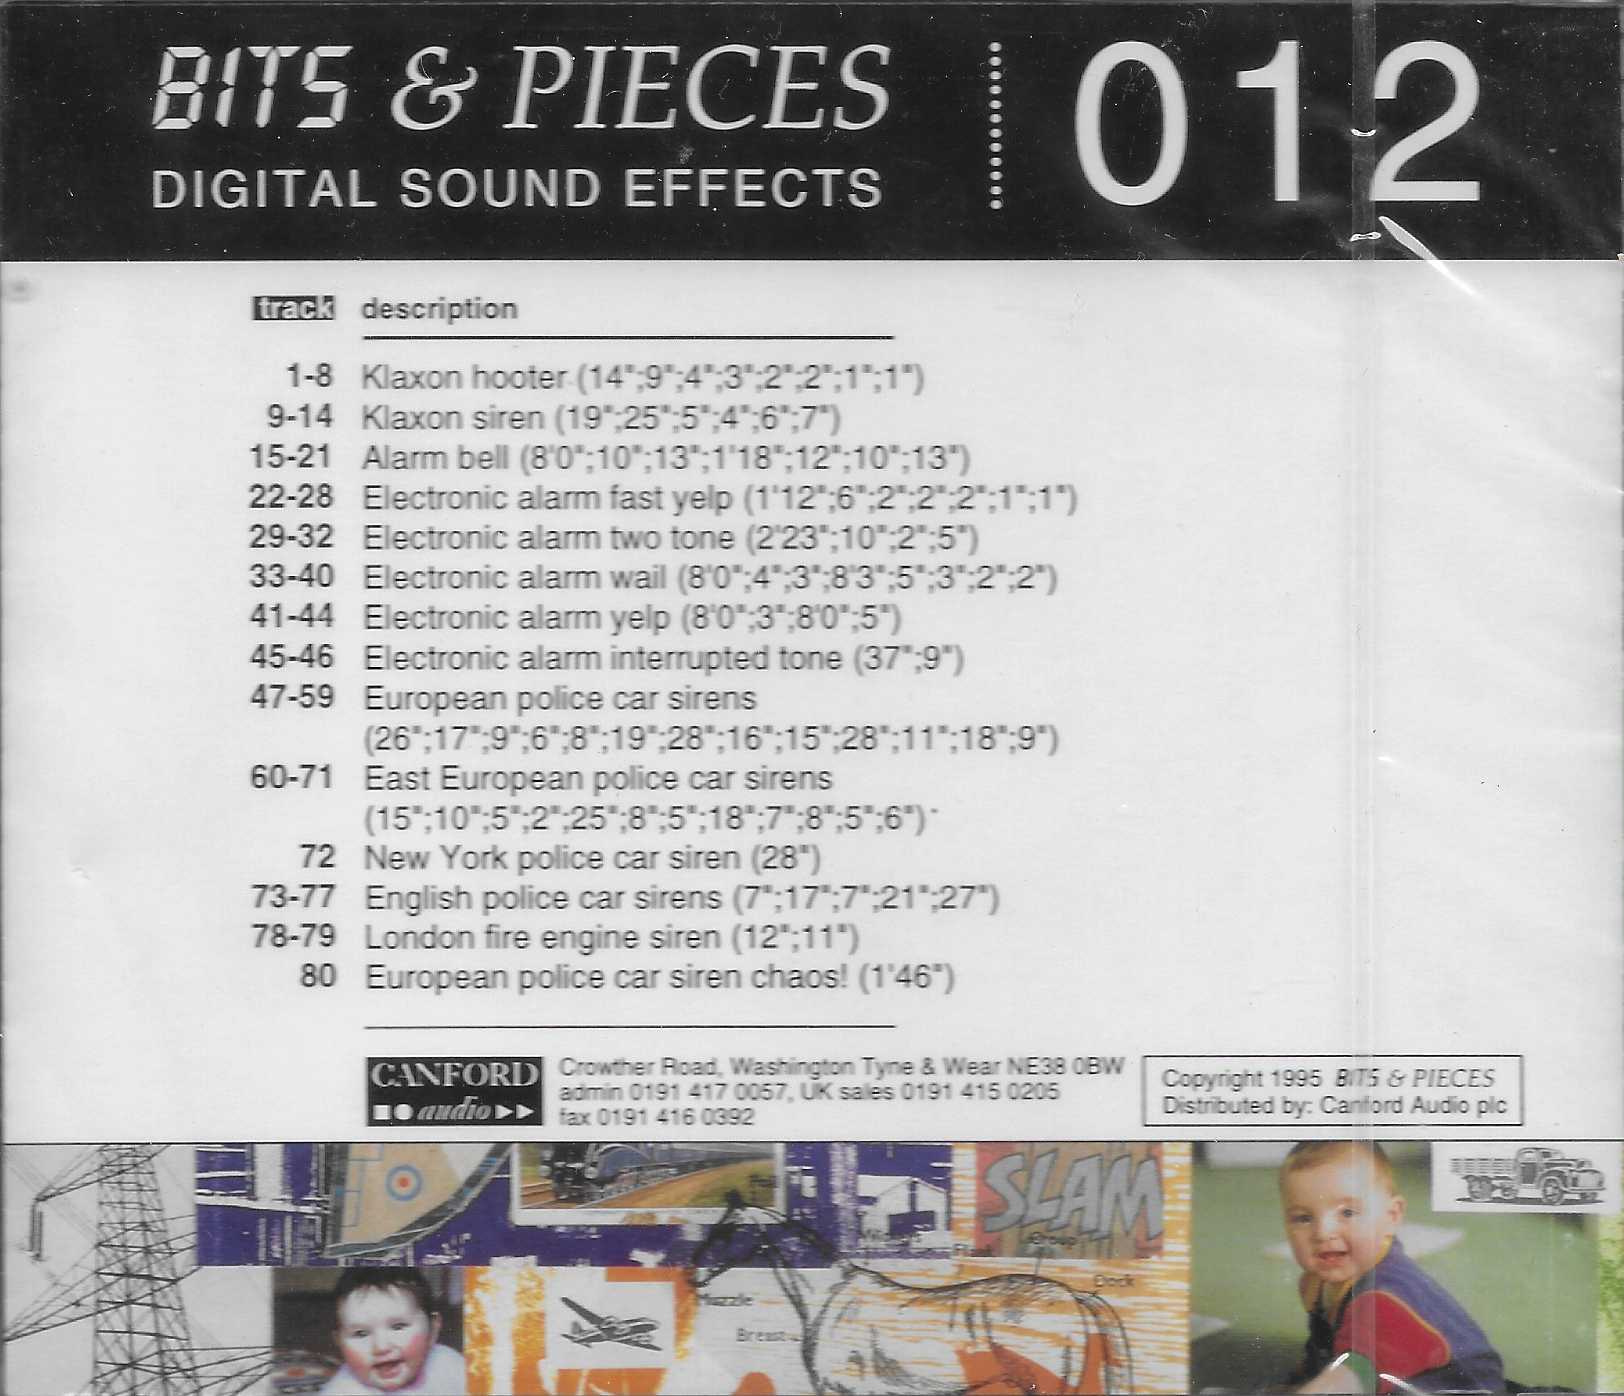 Picture of BITS 012 Bits & pieces digital sound effects 012 by artist Various from ITV, Channel 4 and Channel 5 library